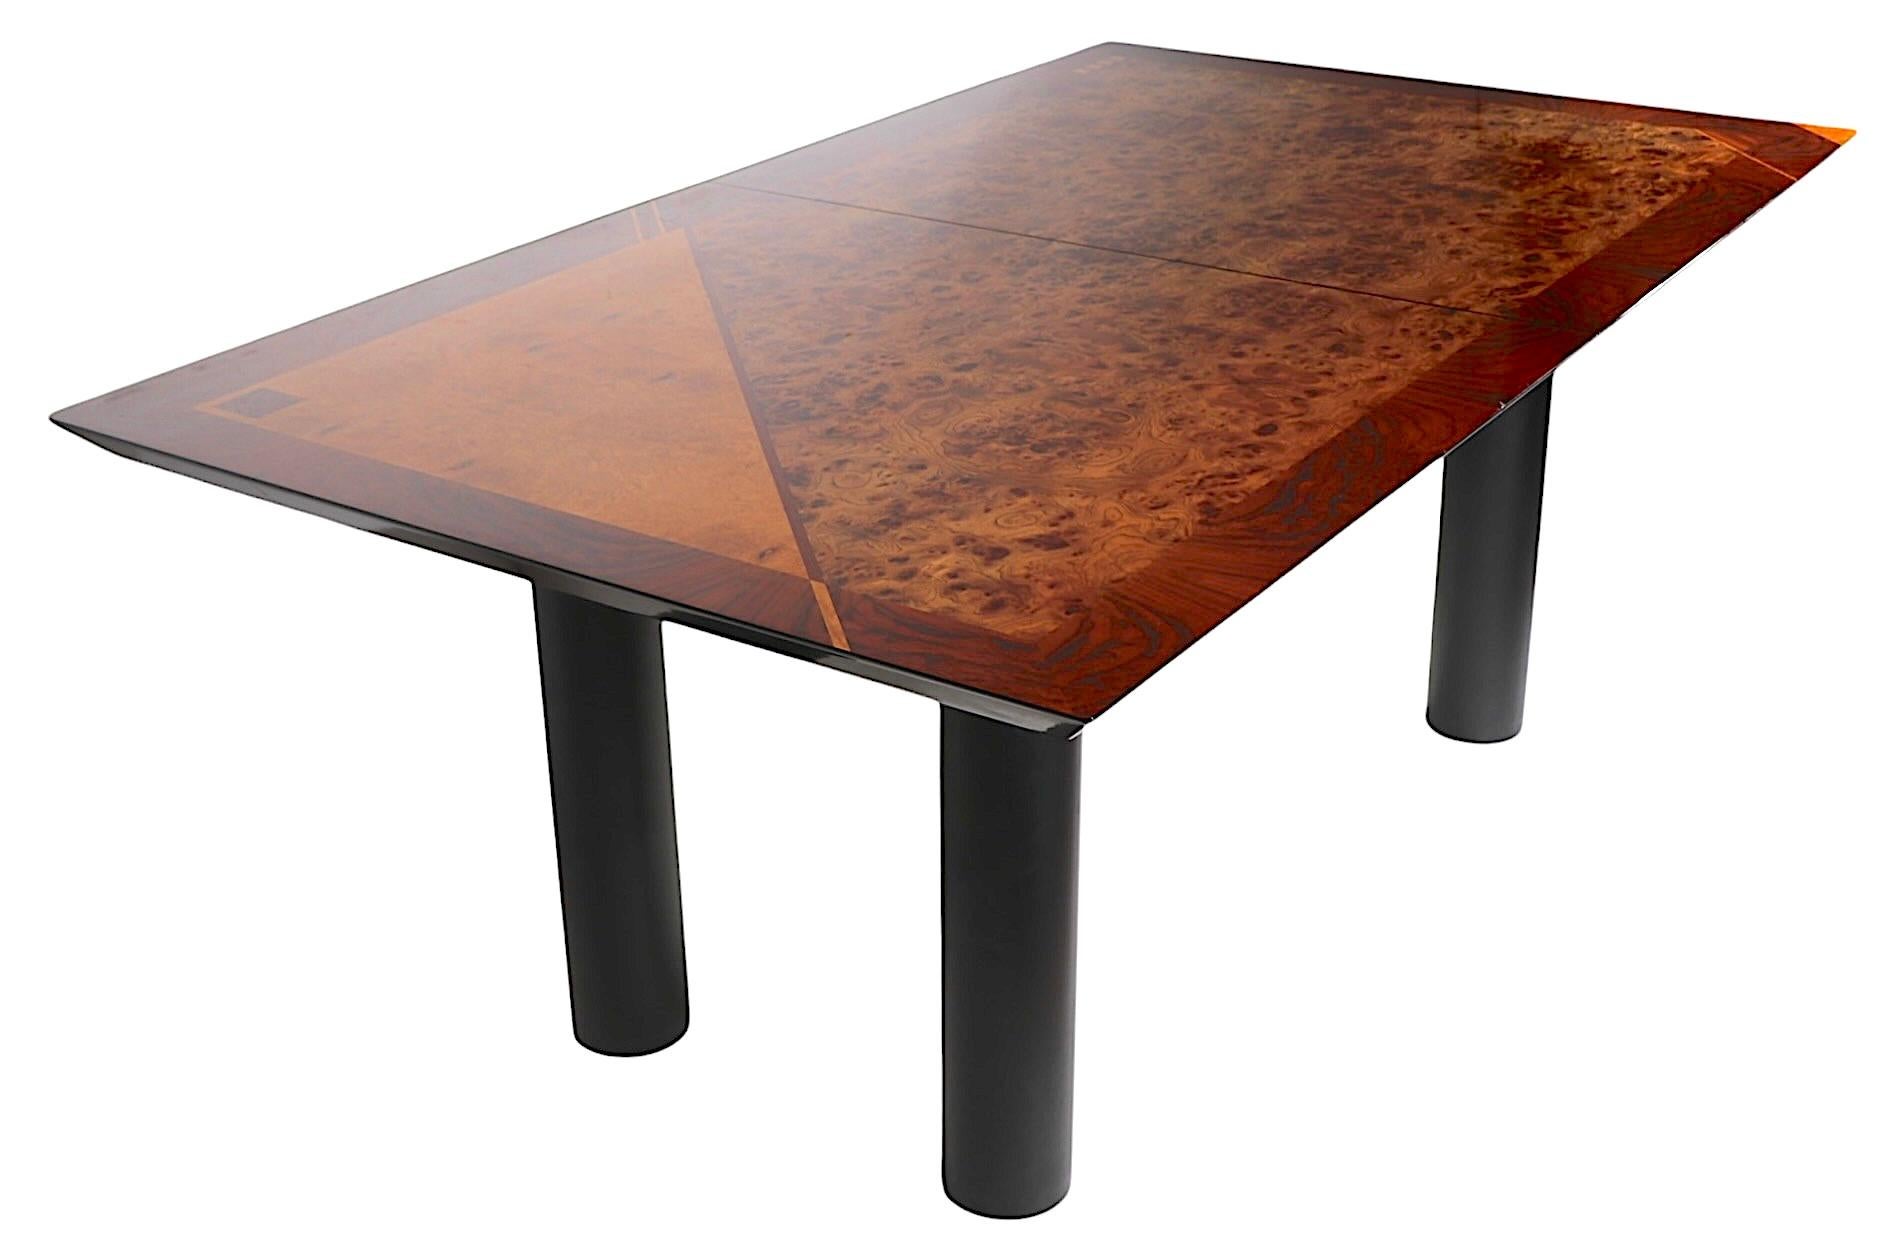 Voguish, chic and stylish dining table, designed by Oscar Dell Arredamento, made in Italy for Miniforms, circa 1970's. The table features a classic geometric  postmodern marquetry inlay top of burl, elm, and ash veneers on a dramatic high gloss top